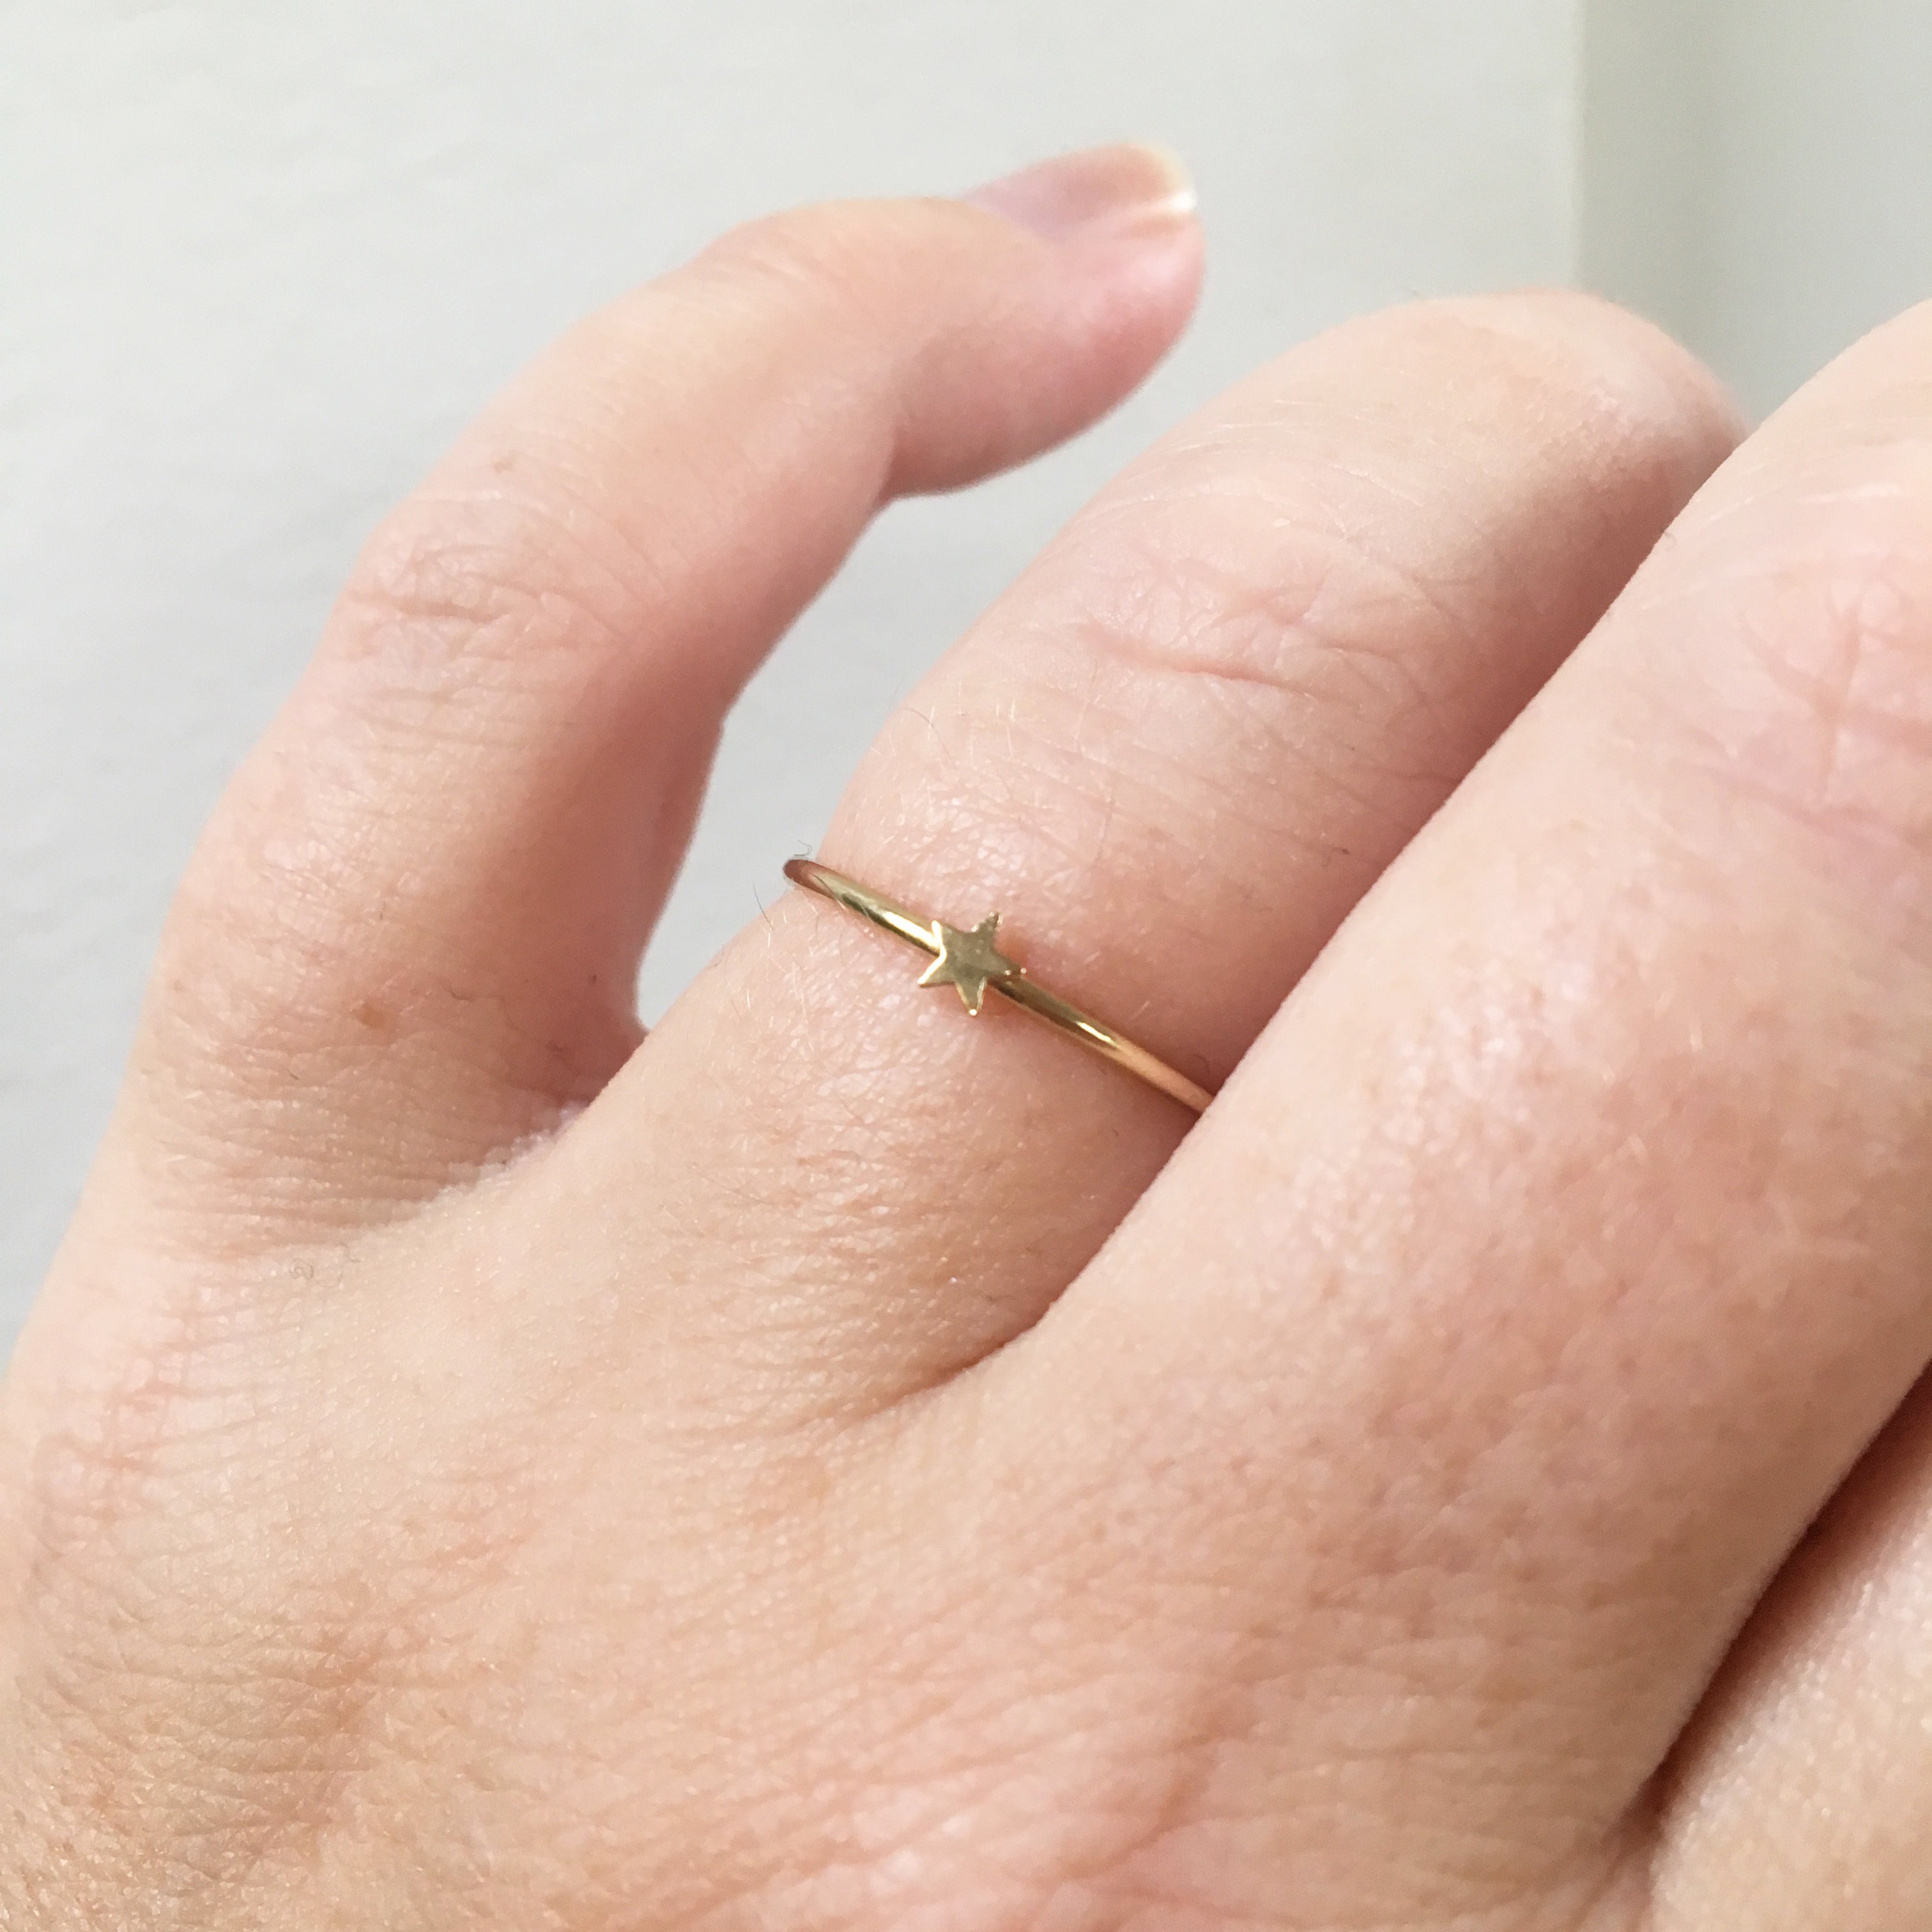 Tiny Ring,Small Ring,Dainty Ring,Stacking Ring,Stackable Ring,7 Diamond Ring,Rose  Gold Ring,Small Gold Ring,silver Engagement Ring,Christmas Gift for Women |  Wish